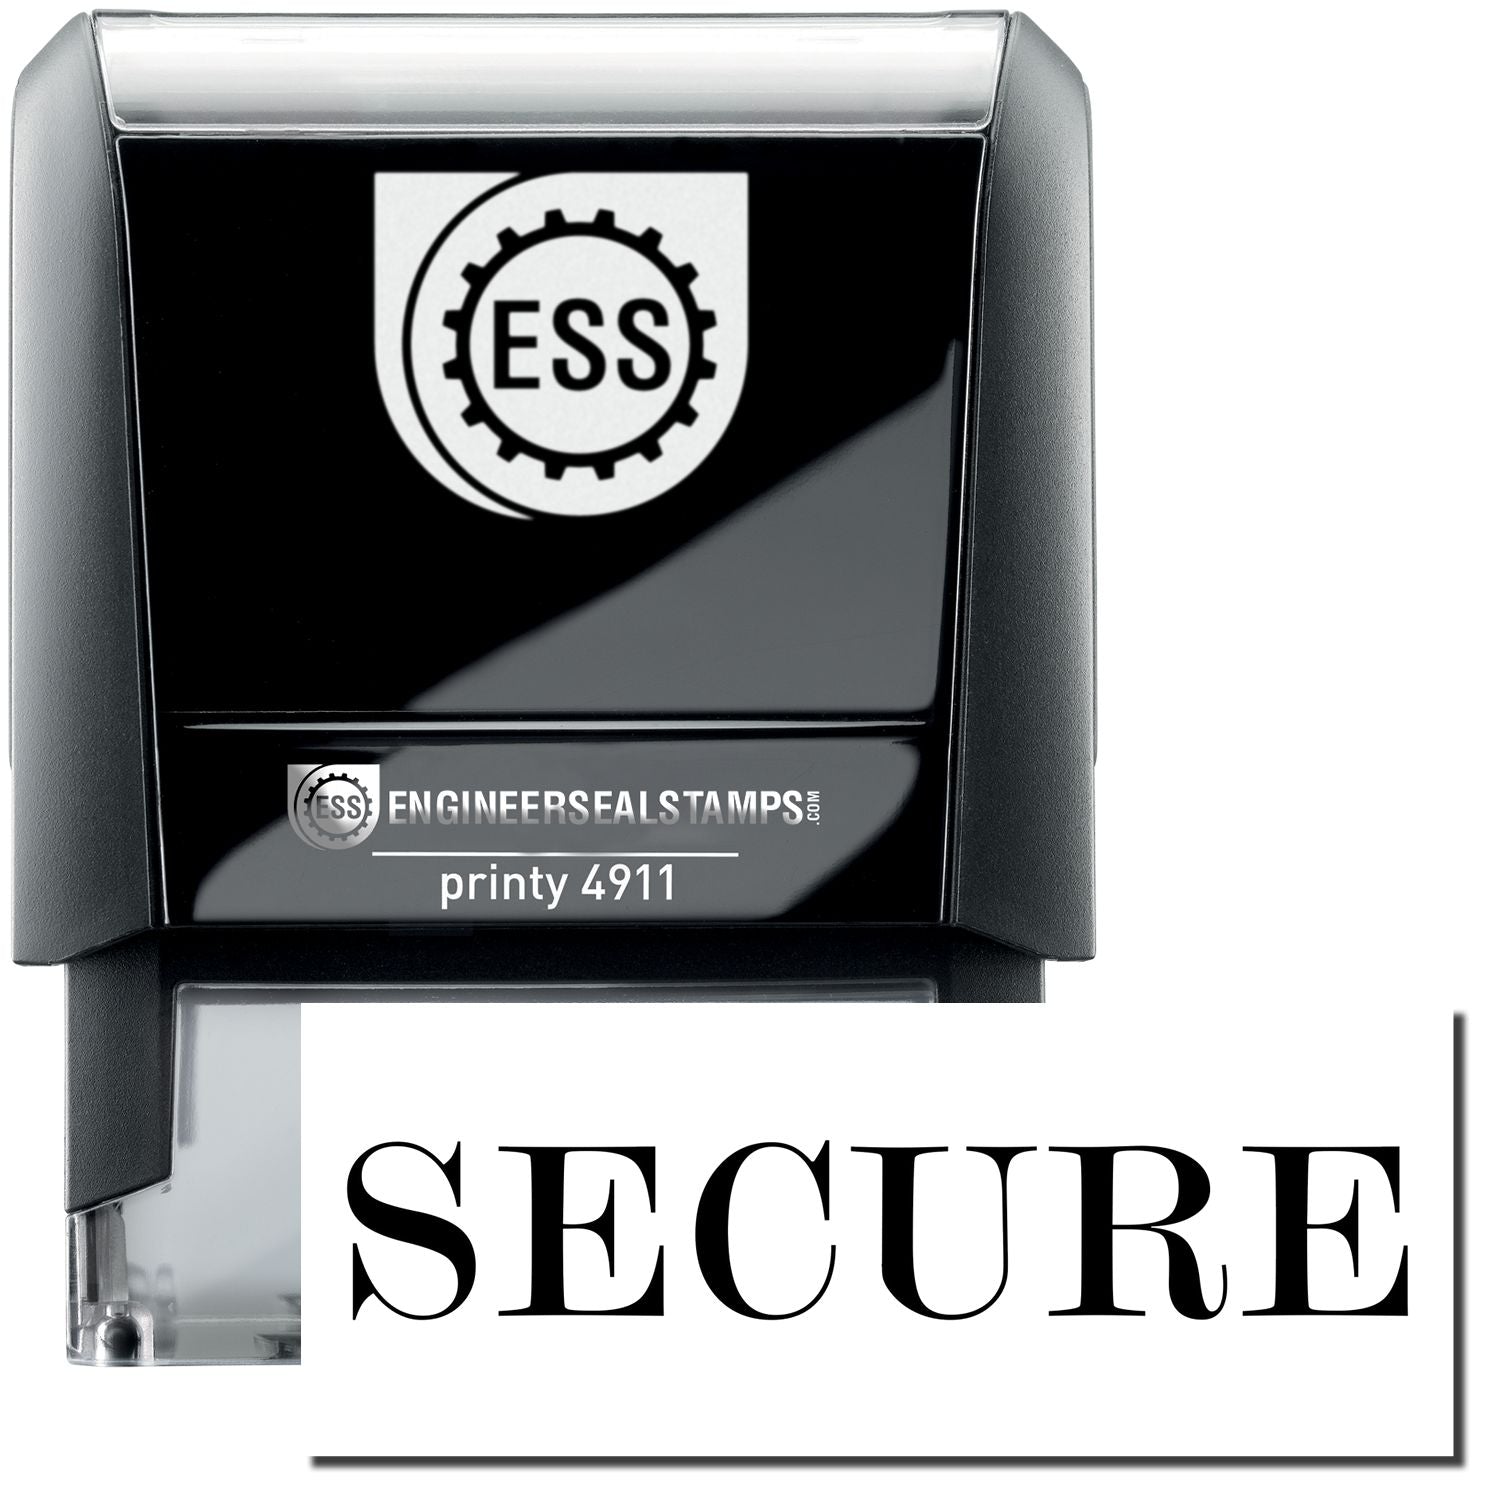 A self-inking stamp with a stamped image showing how the text "SECURE" is displayed after stamping.